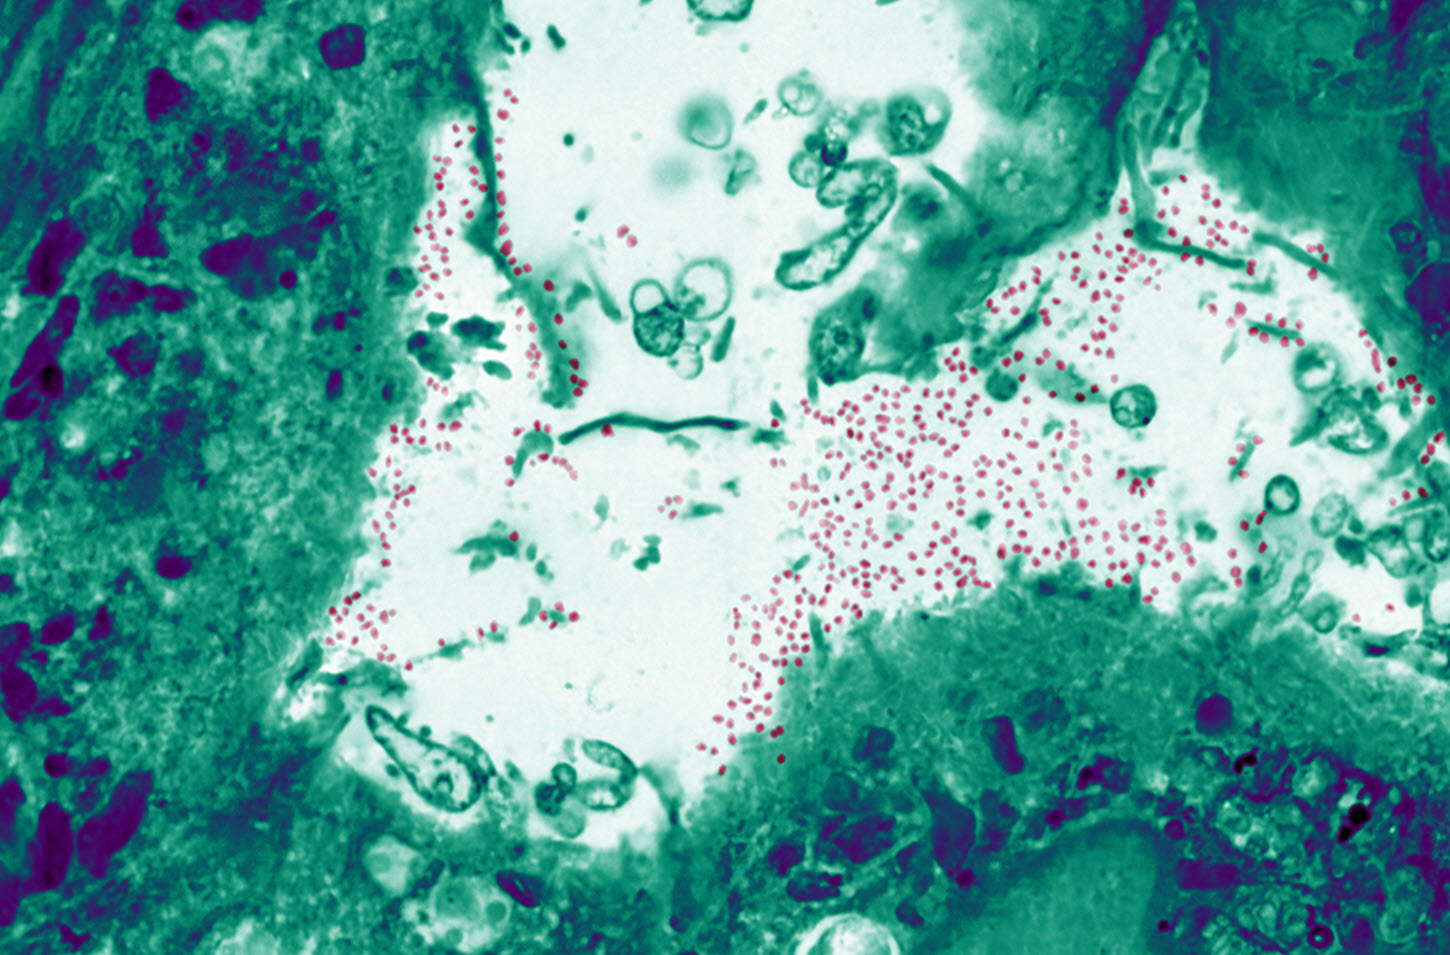 Covid19 infected cells imaged with JSM-6335F SEM